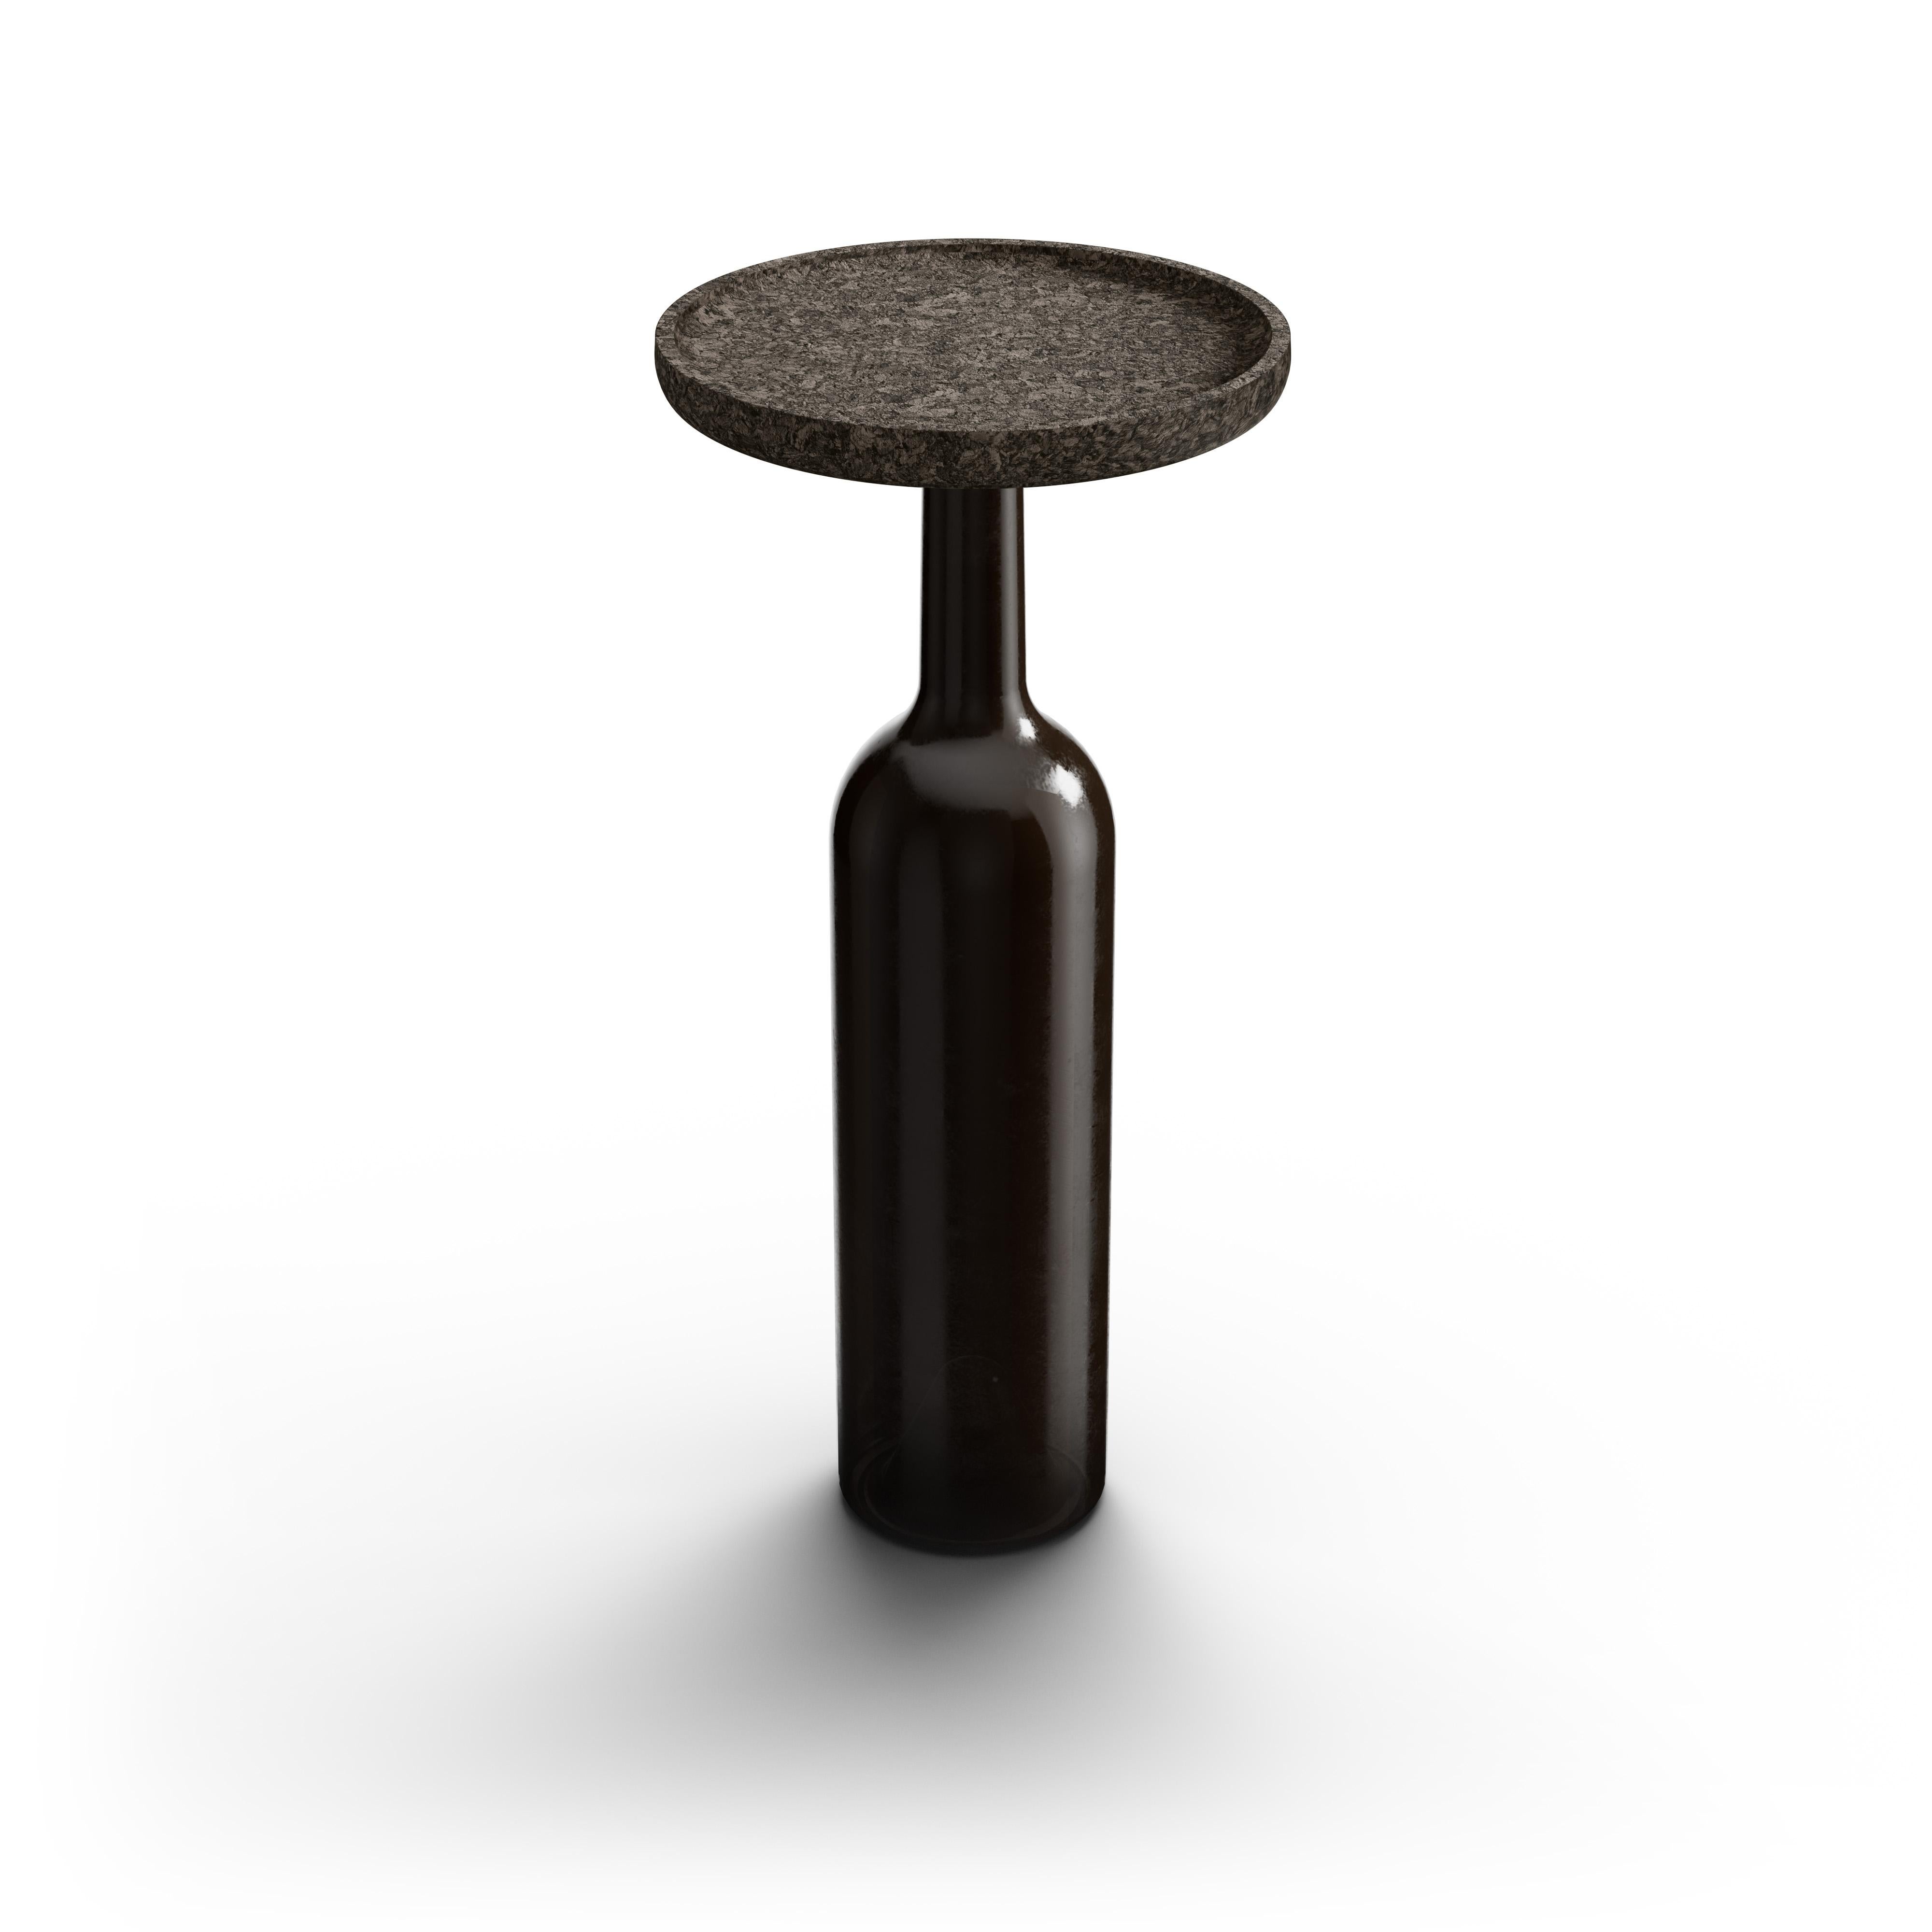 Dutch Hospitality wine table 'Essence' from cork and glass by Reinier de Jong For Sale